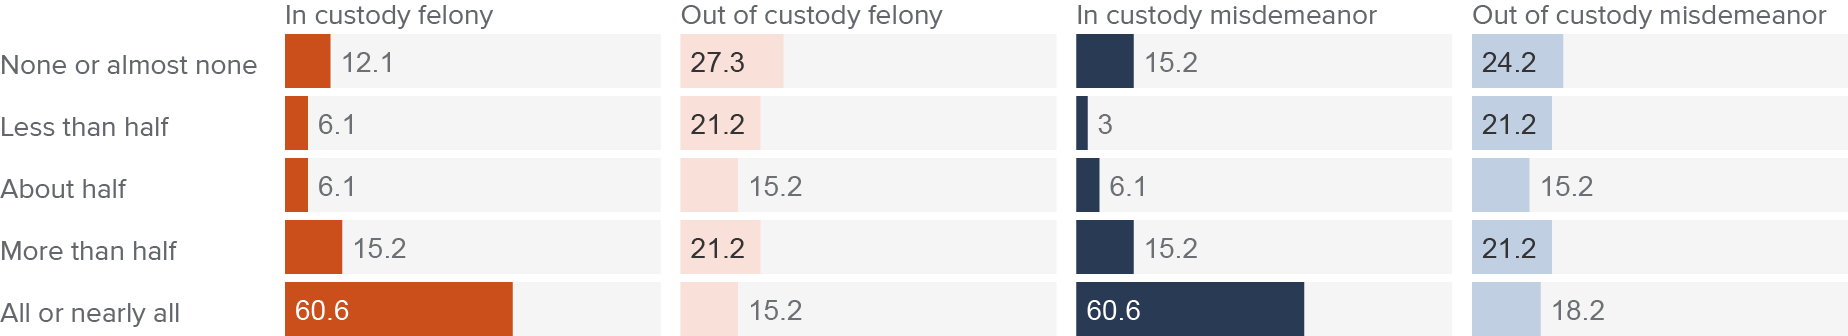 figure 7 - A majority of courts reported remote arraignments for defendants who were held in custody